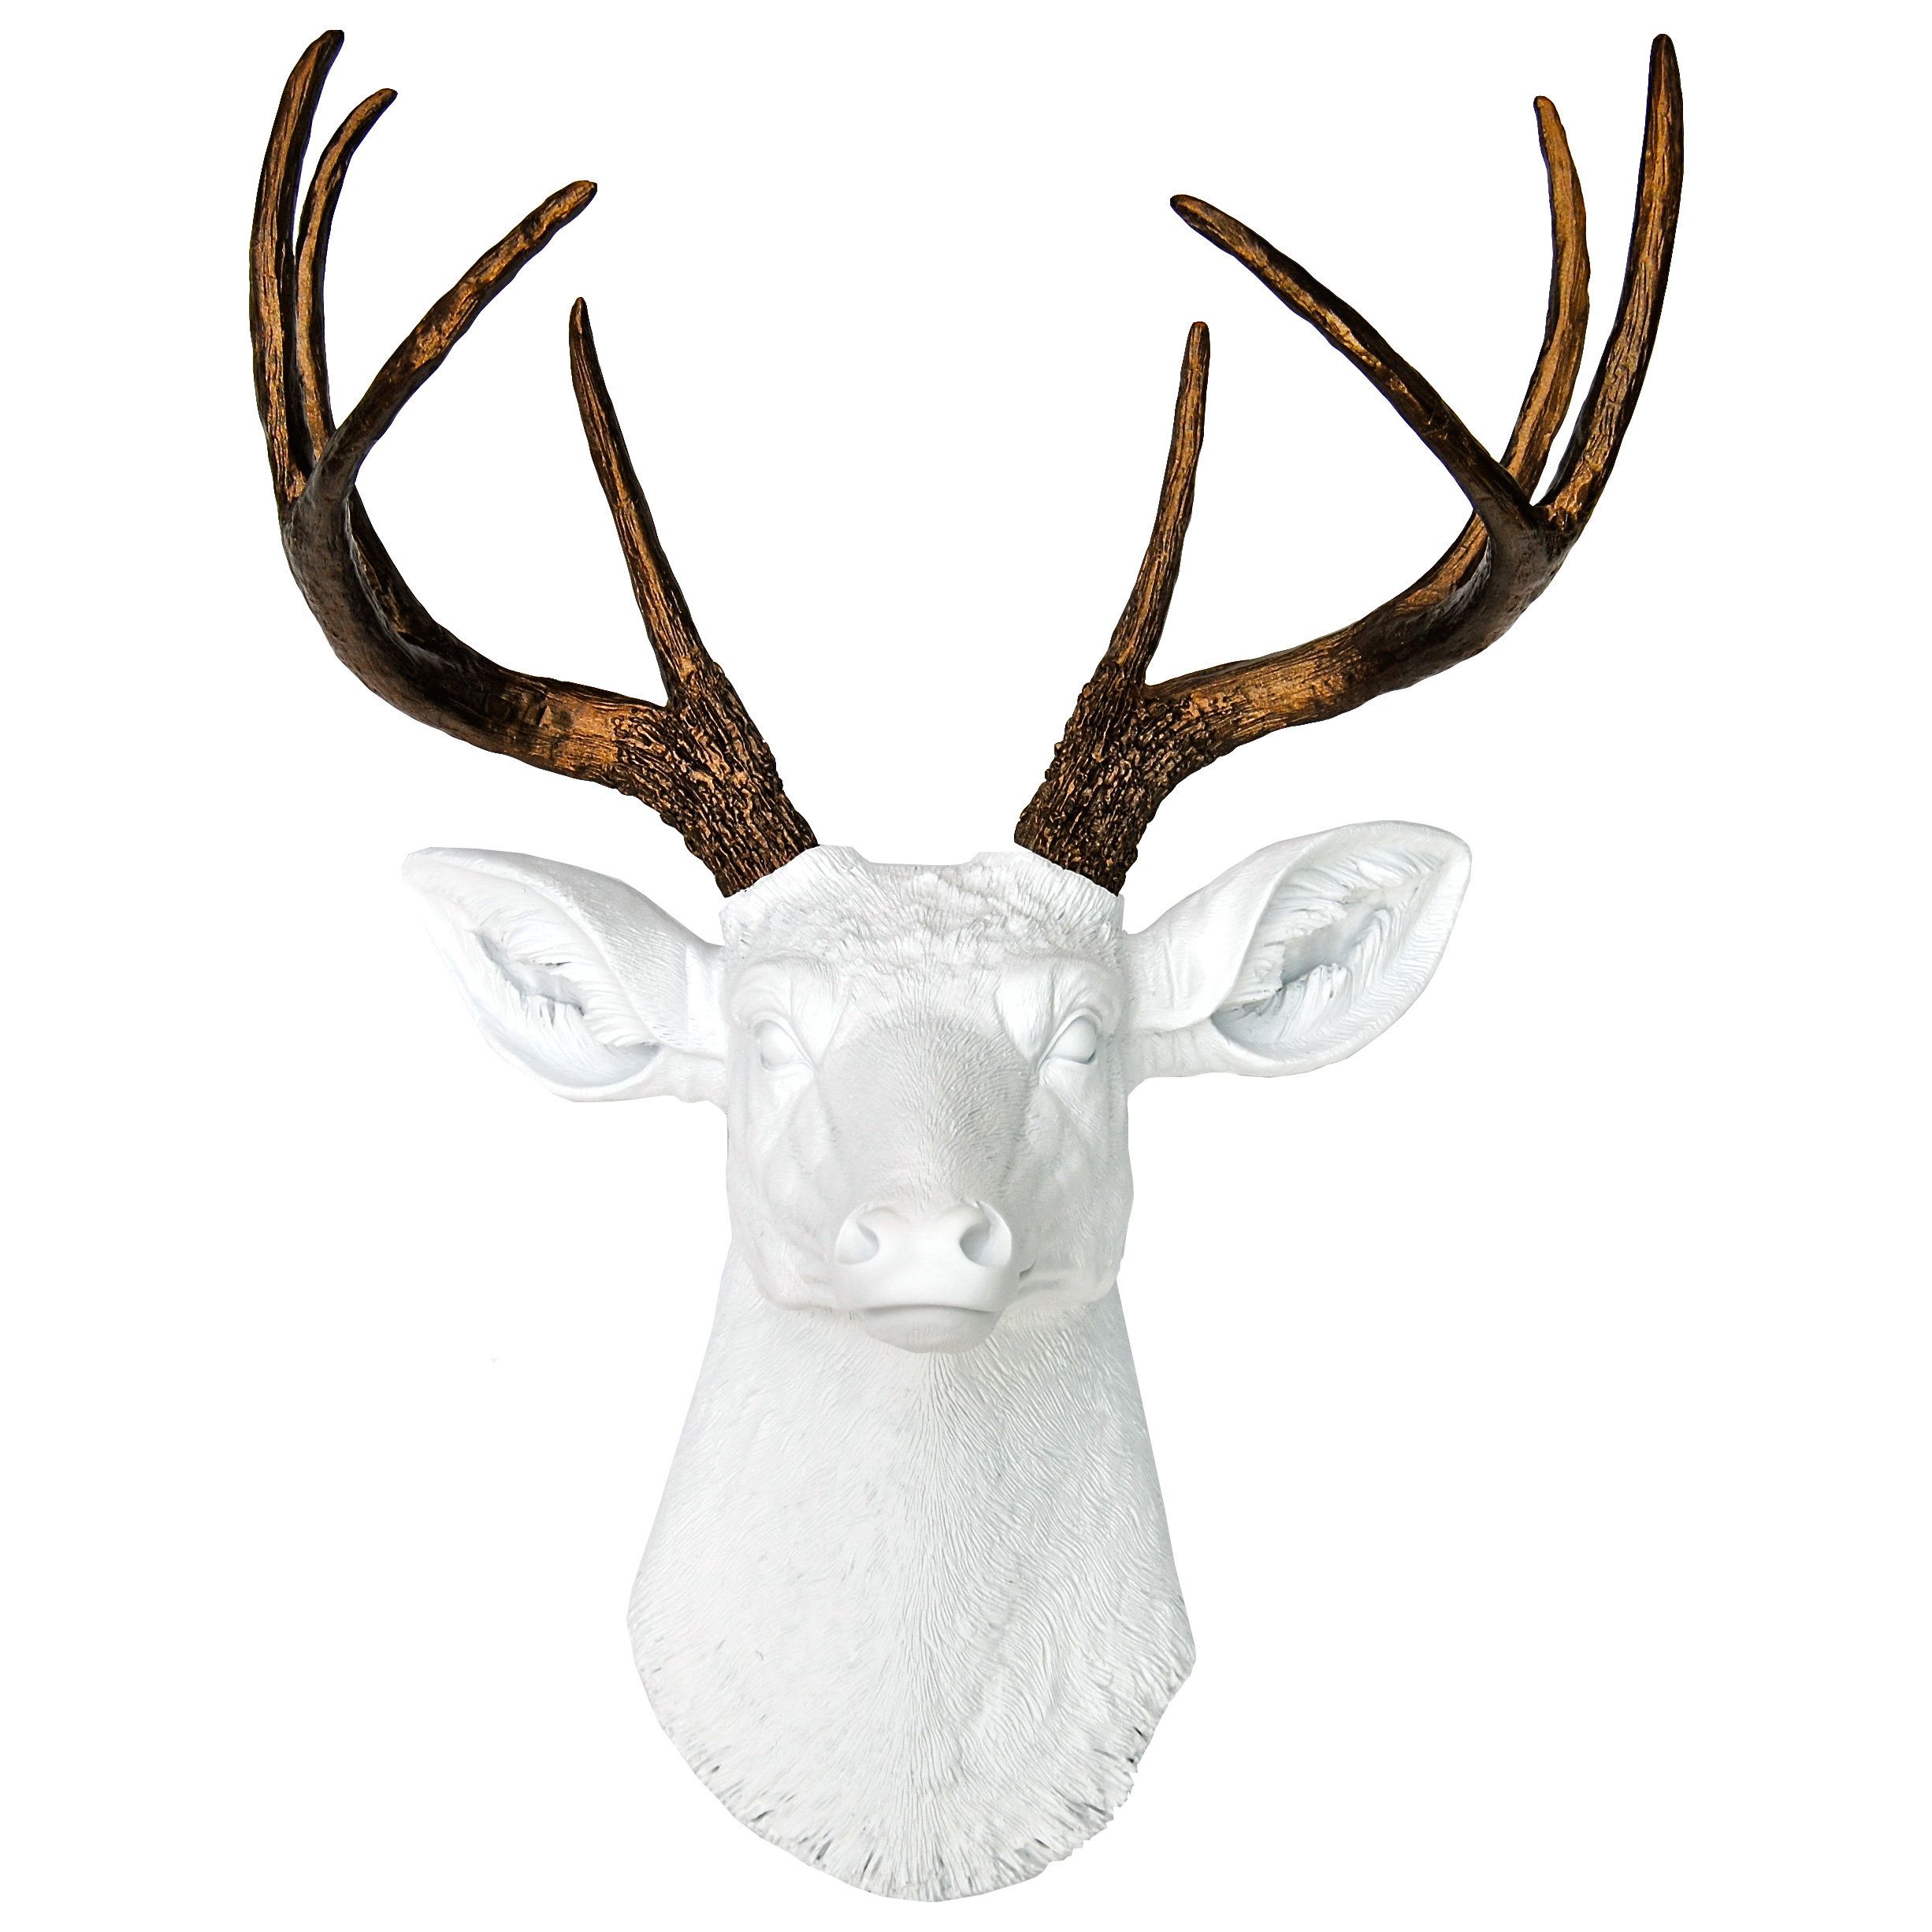 Newest Atlantis Faux Taxidermy Wall Decor Throughout Near And Deer Atlantis Faux Taxidermy Wall Décor & Reviews (View 1 of 20)